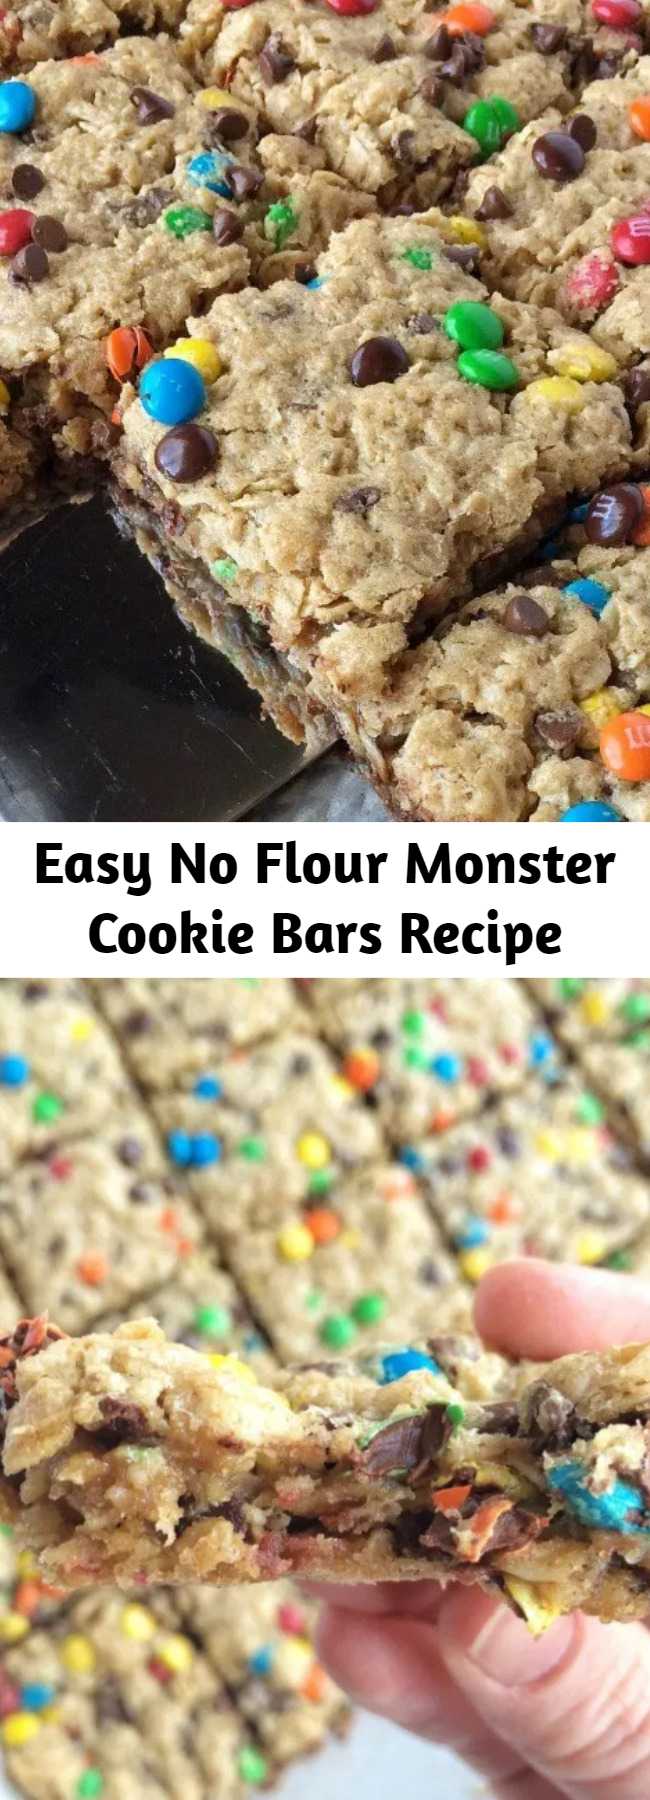 Easy No Flour Monster Cookie Bars Recipe - No flour monster cookie bars are the perfect back-to-school snack! They freeze really well and who can resist these bars loaded with oatmeal, peanut butter, chocolate chips, and m&m's?!